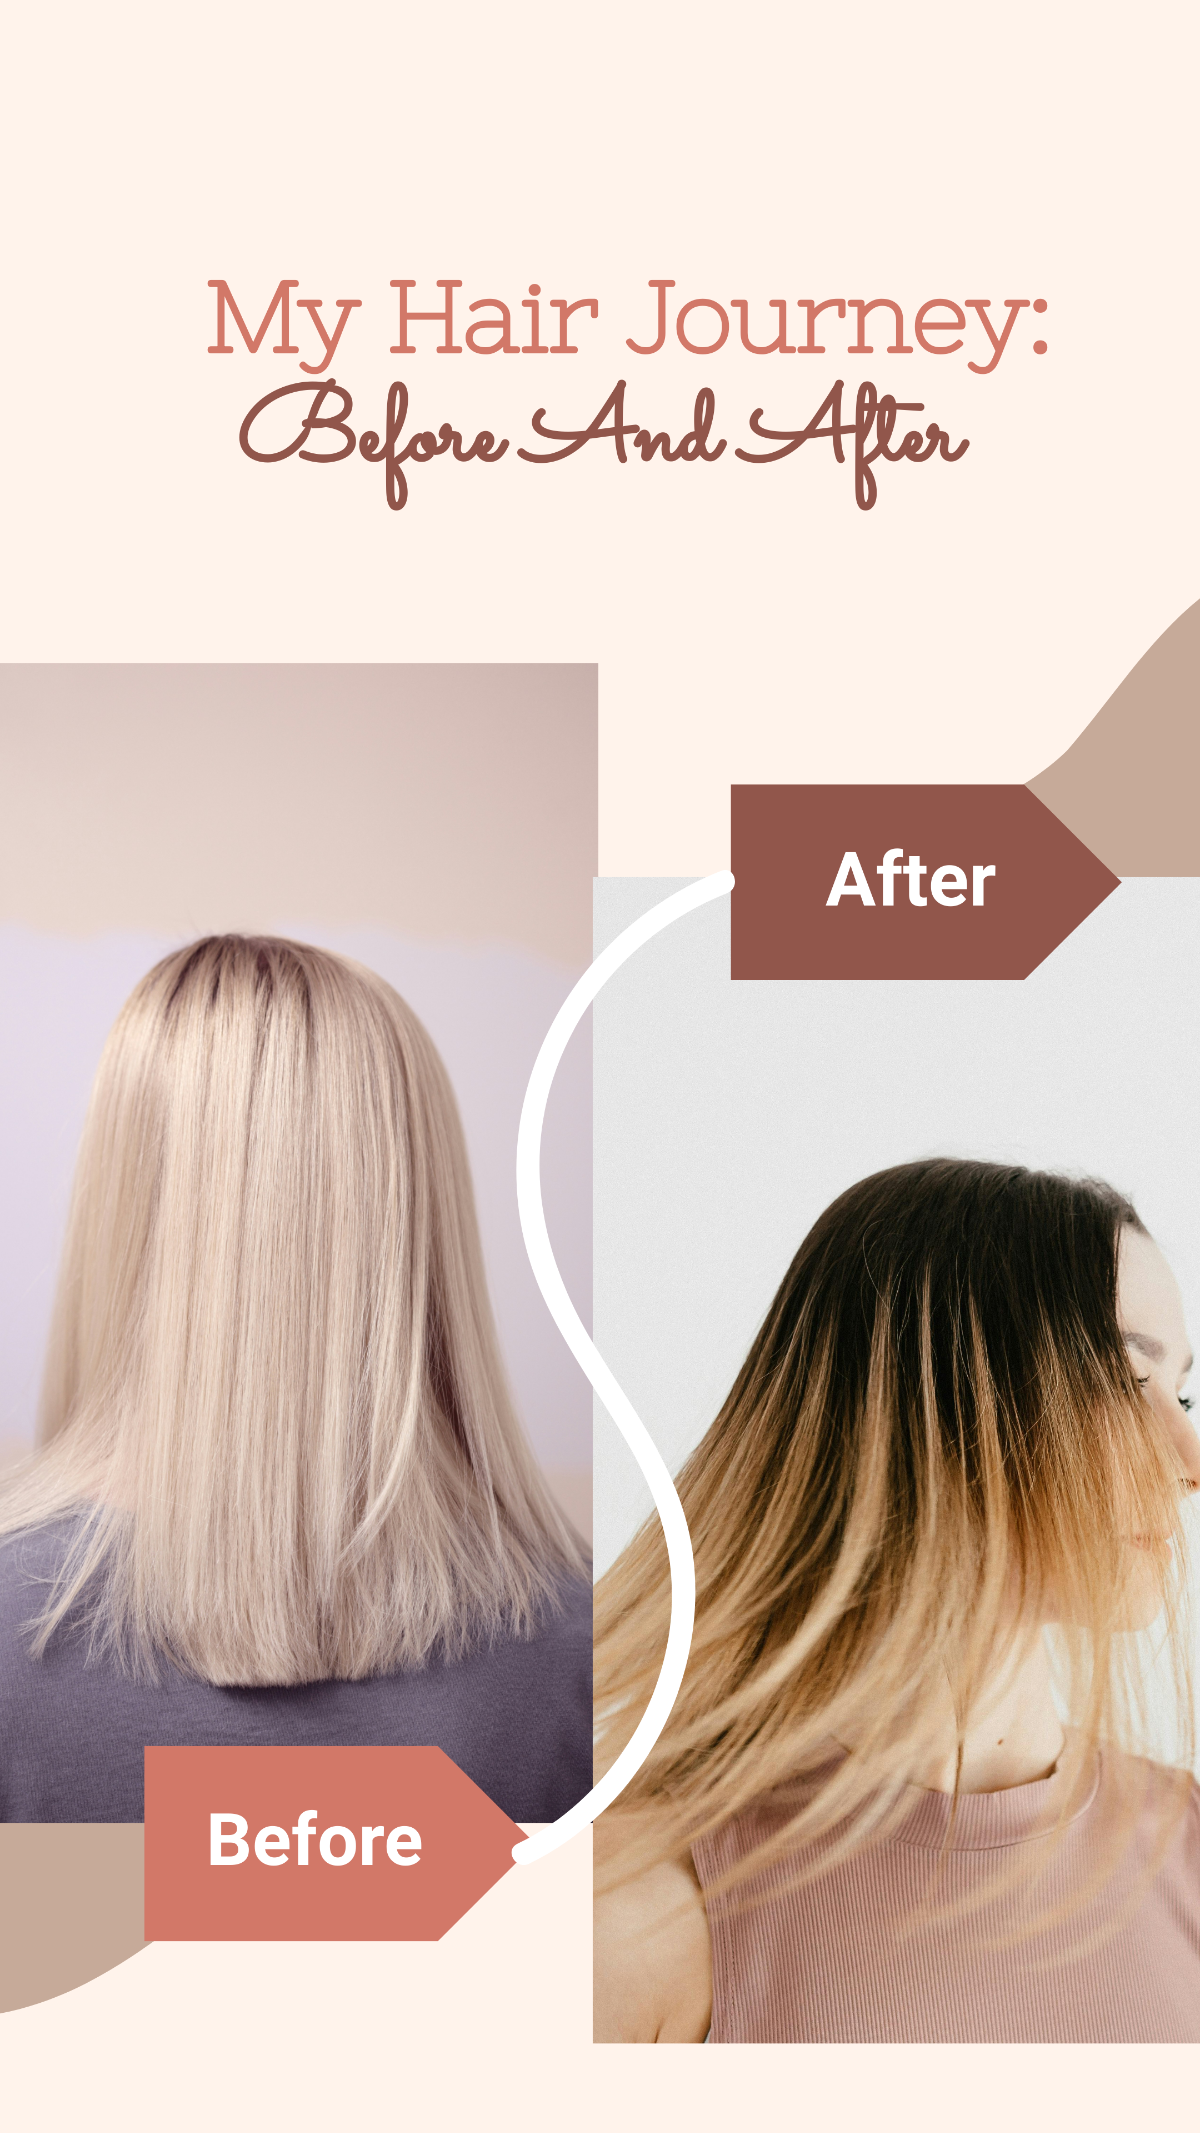 Before and After Hair Journey Story